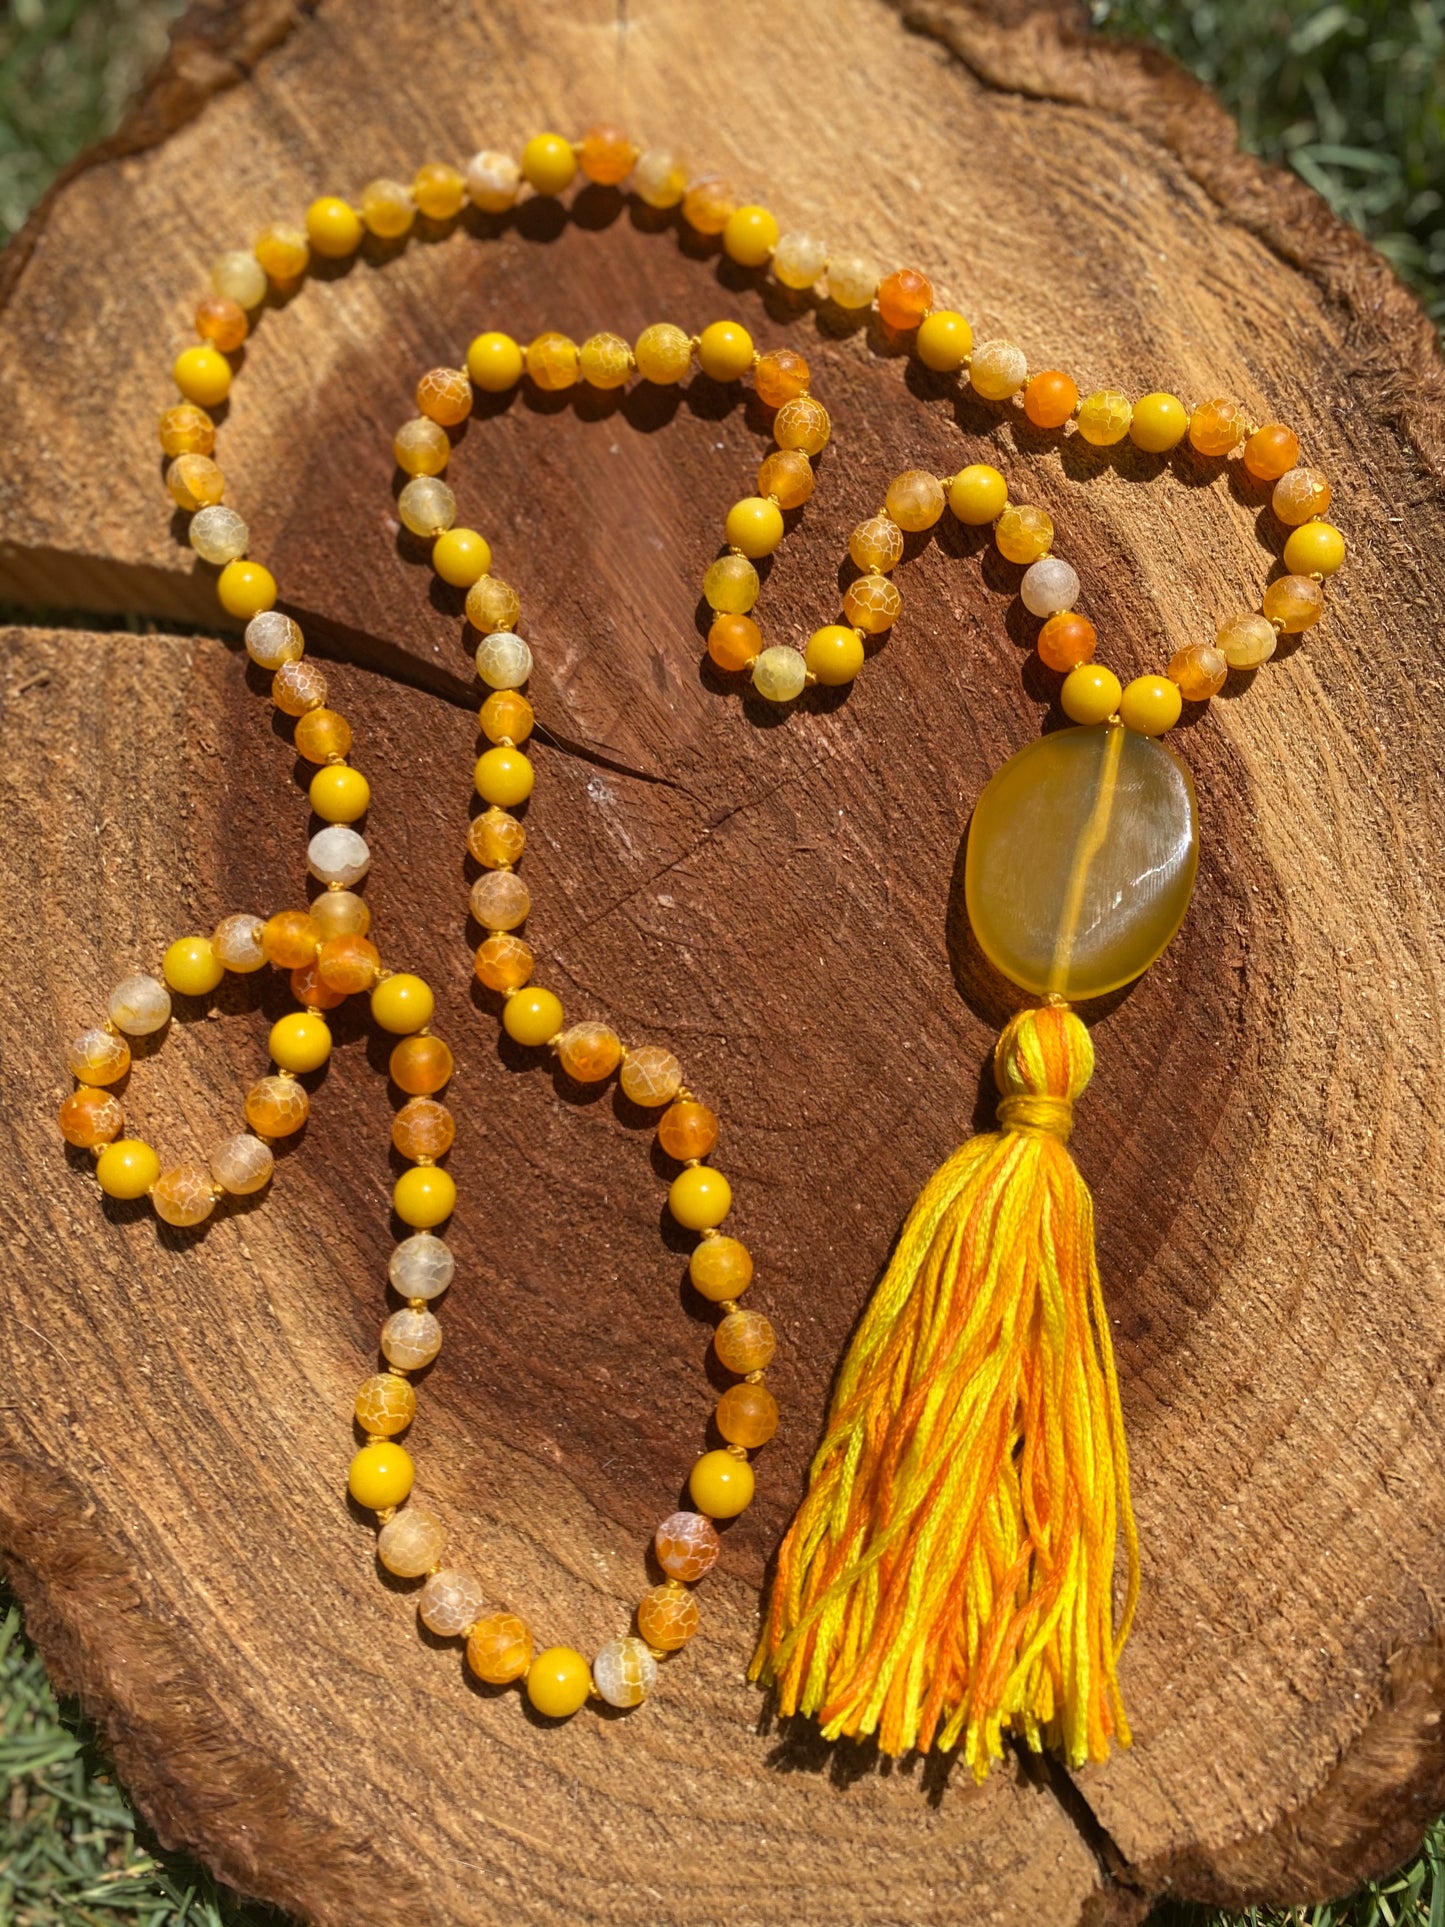 Mountain Yellow Jade and Orange/Yellow matted Agate hand-knotted Mala